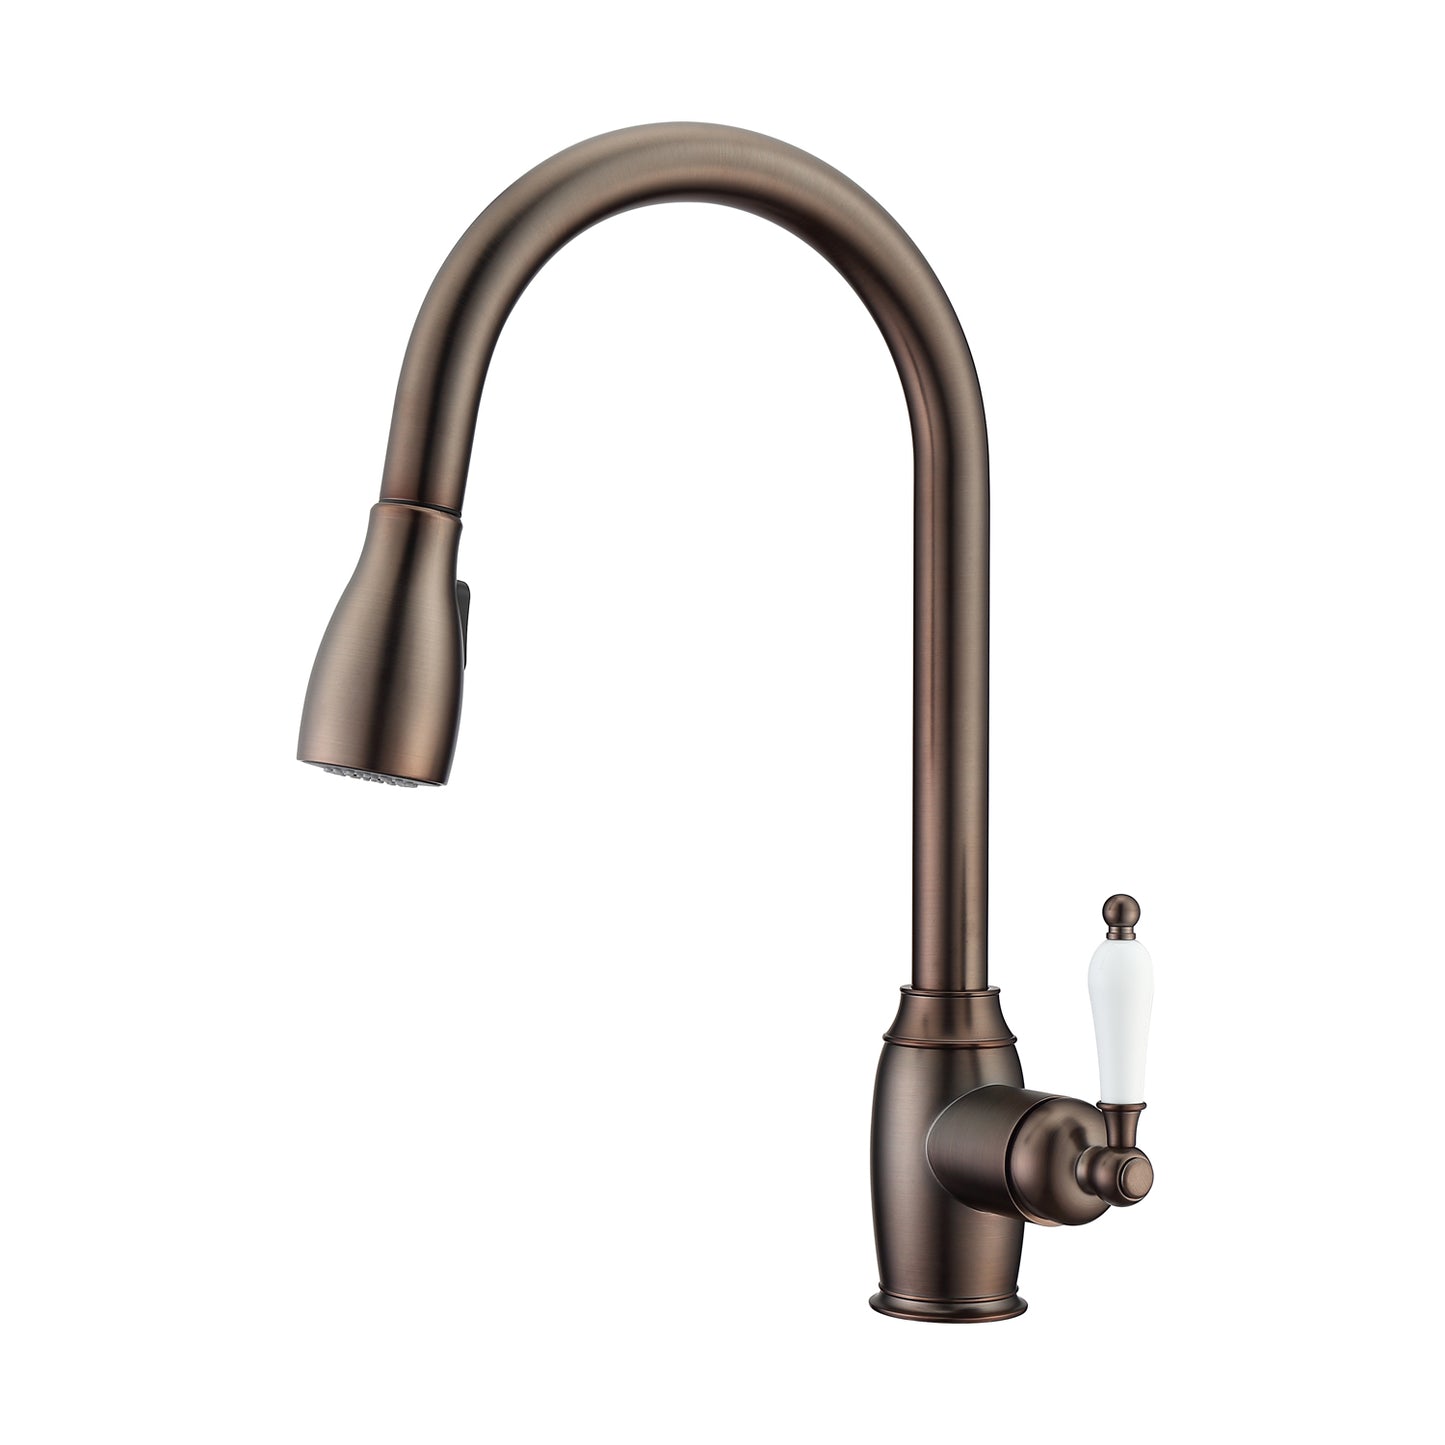 Bristo Kitchen Faucet, Pull-Out Sprayer, Single Porcelain Lever Handle, Oil Rubbed Bronze